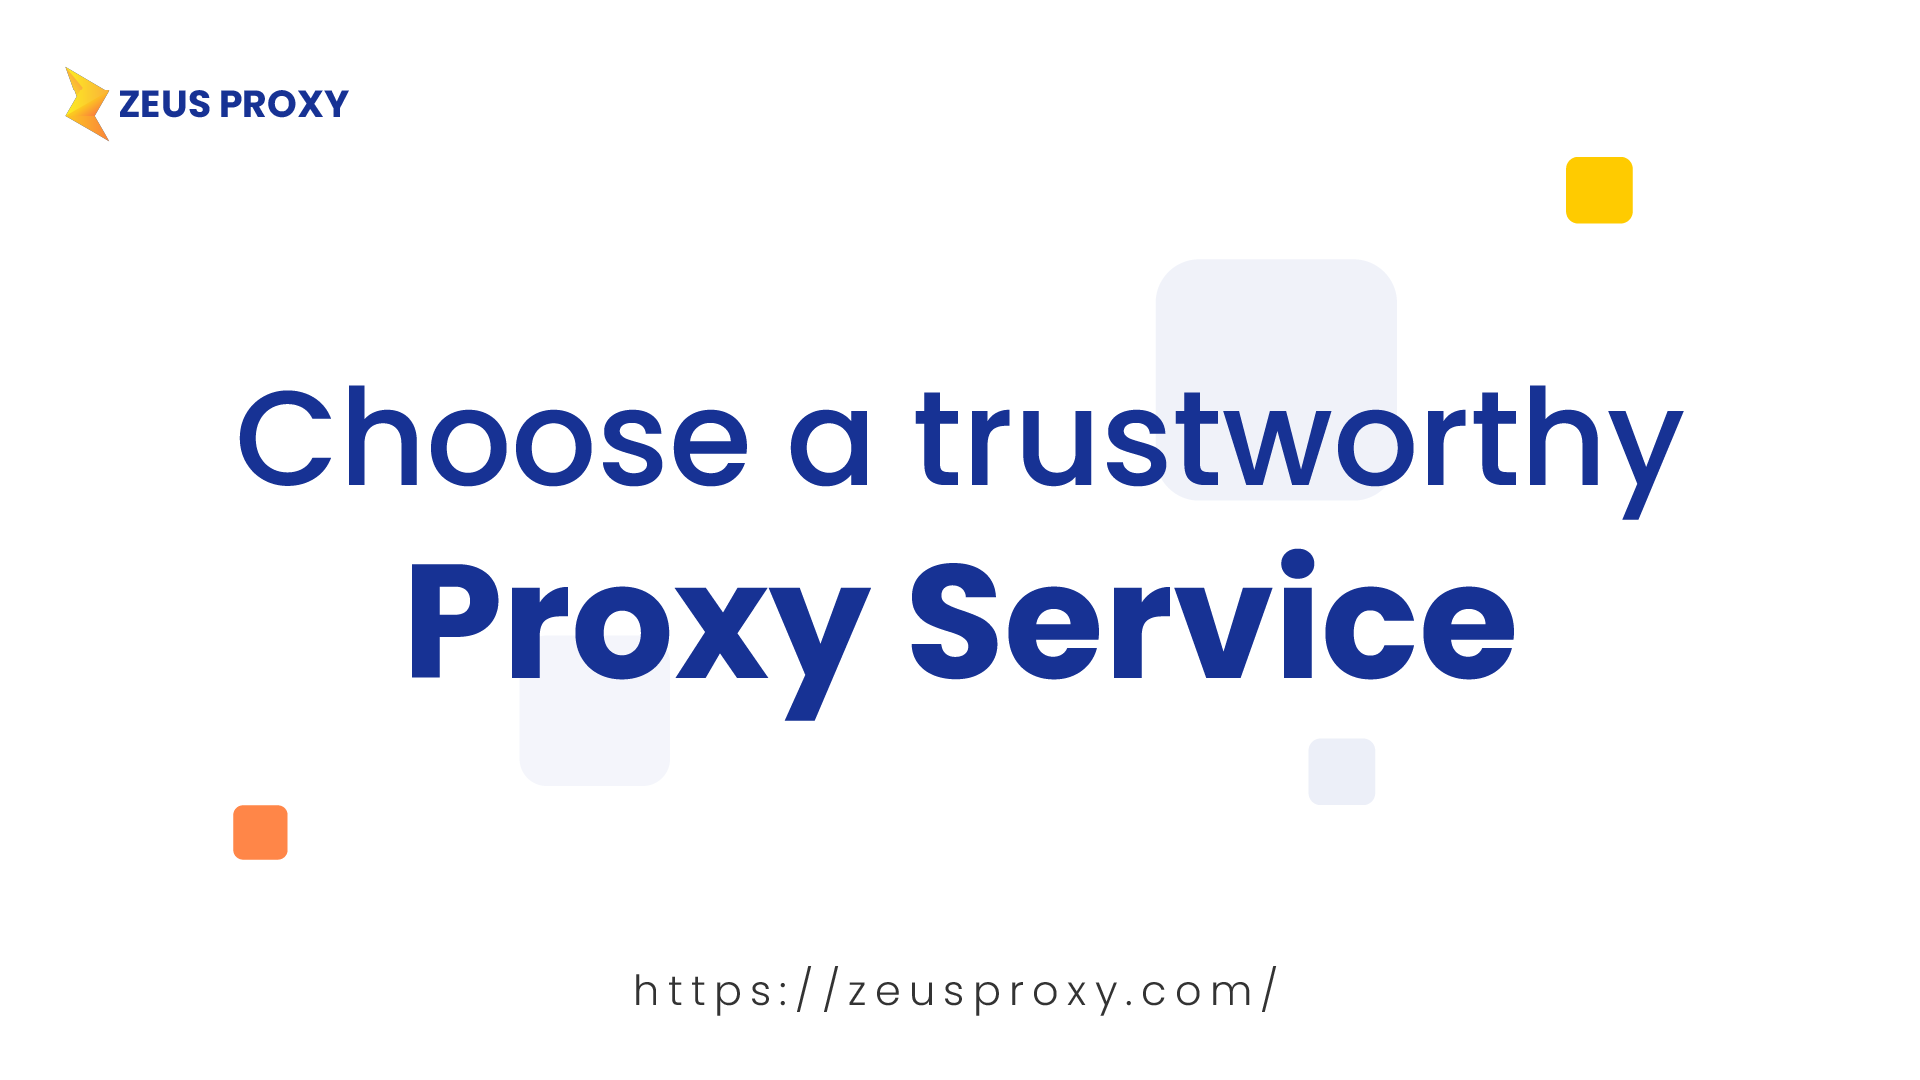 Choosing a trustworthy proxy service: A step-by-step guide